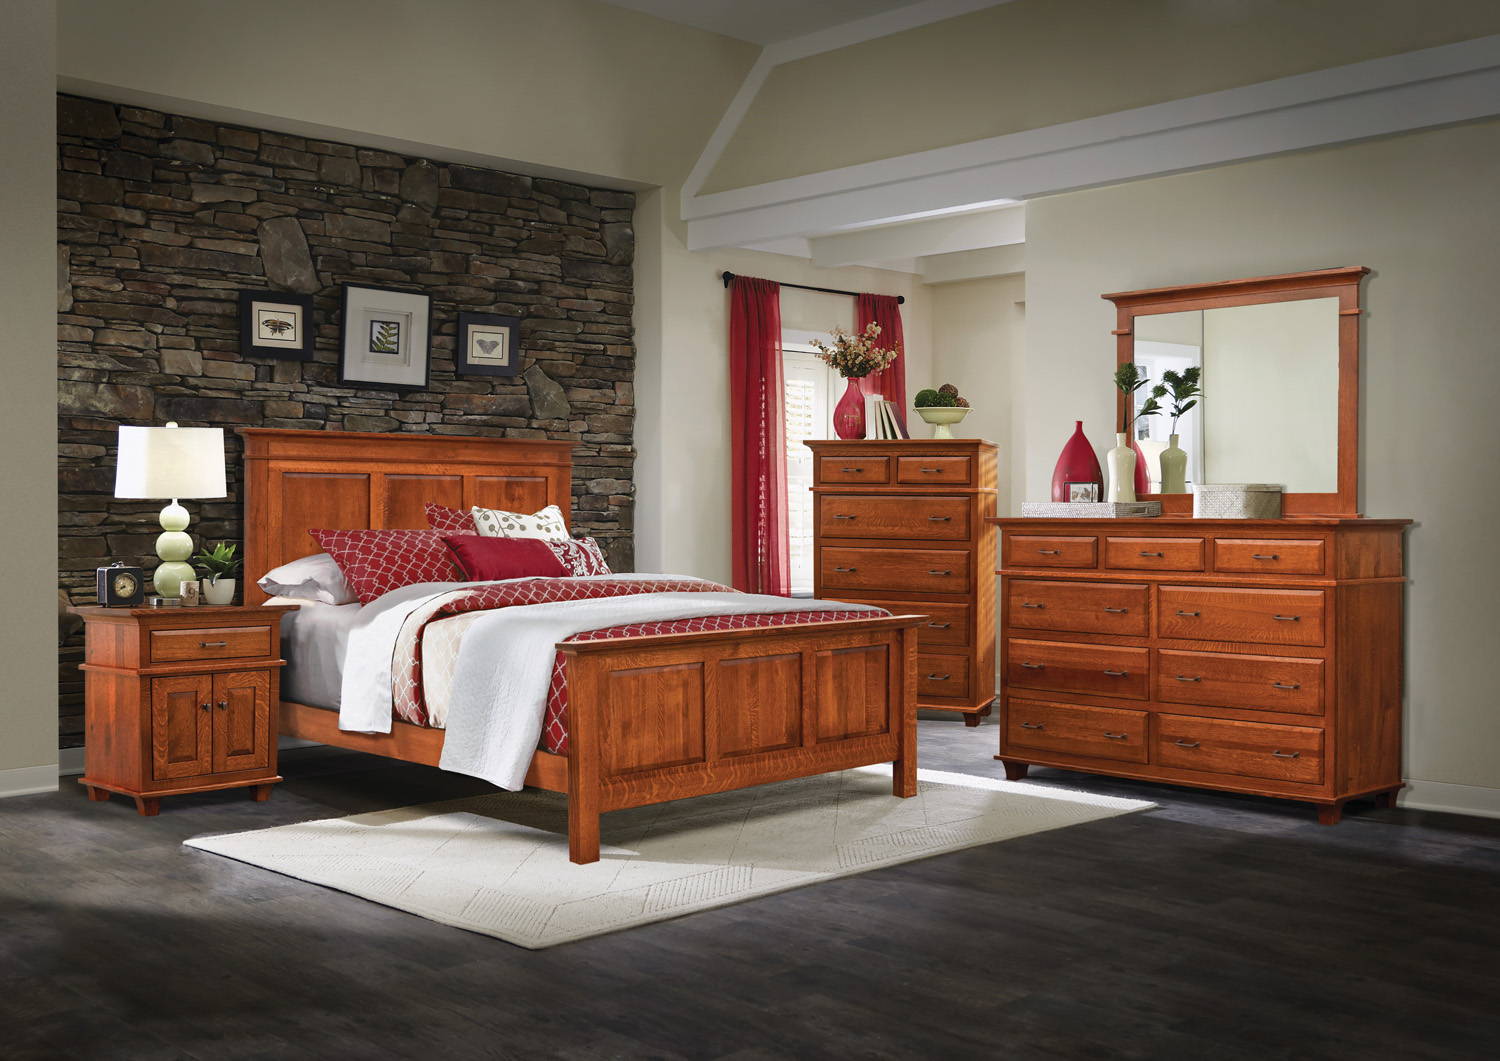 Image of fully customizable Rockwell Bedroom Set through Harvest Home Interiors Amish Solid Wood Furniture